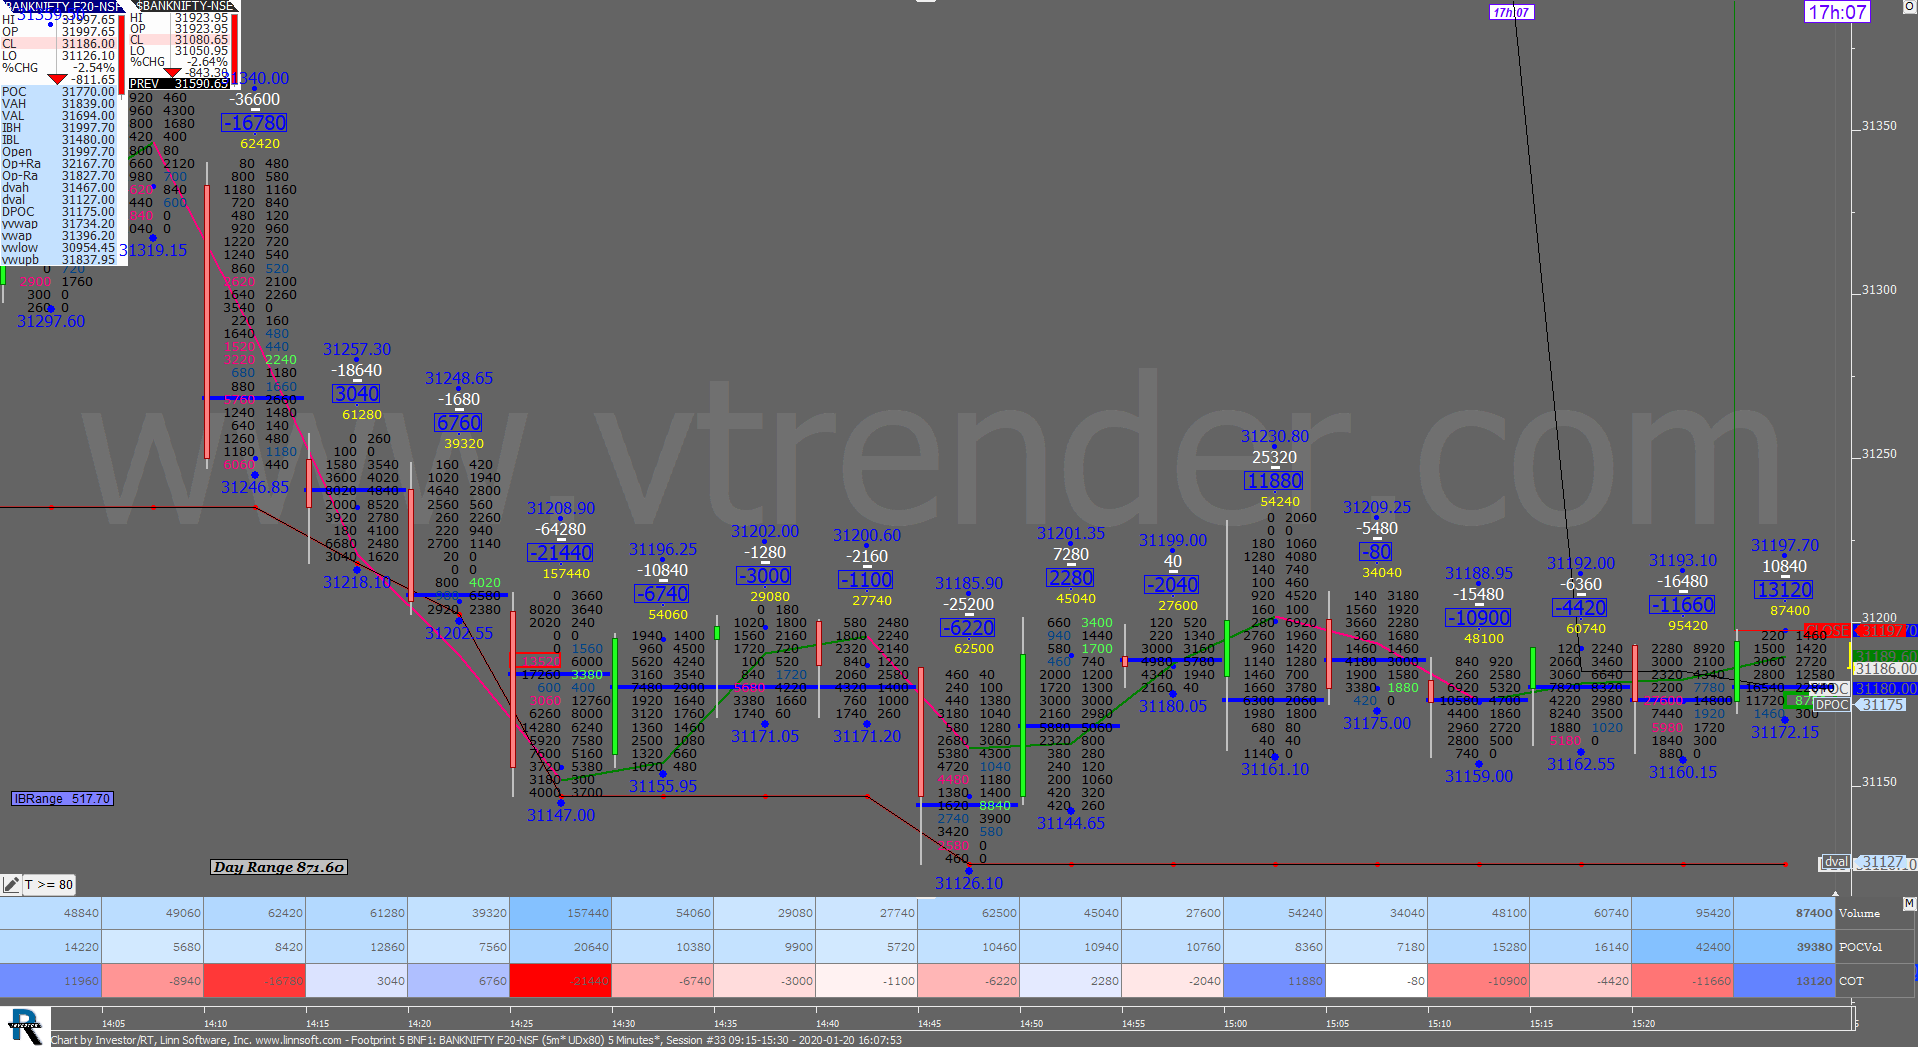 5 25 Order Flow Charts Dated 20Th Jan 2020 (5 Mins) Banknifty Futures, Day Trading, Intraday Trading, Intraday Trading Strategies, Nifty Futures, Order Flow Analysis, Support And Resistance, Trading Strategies, Volume Profile Trading